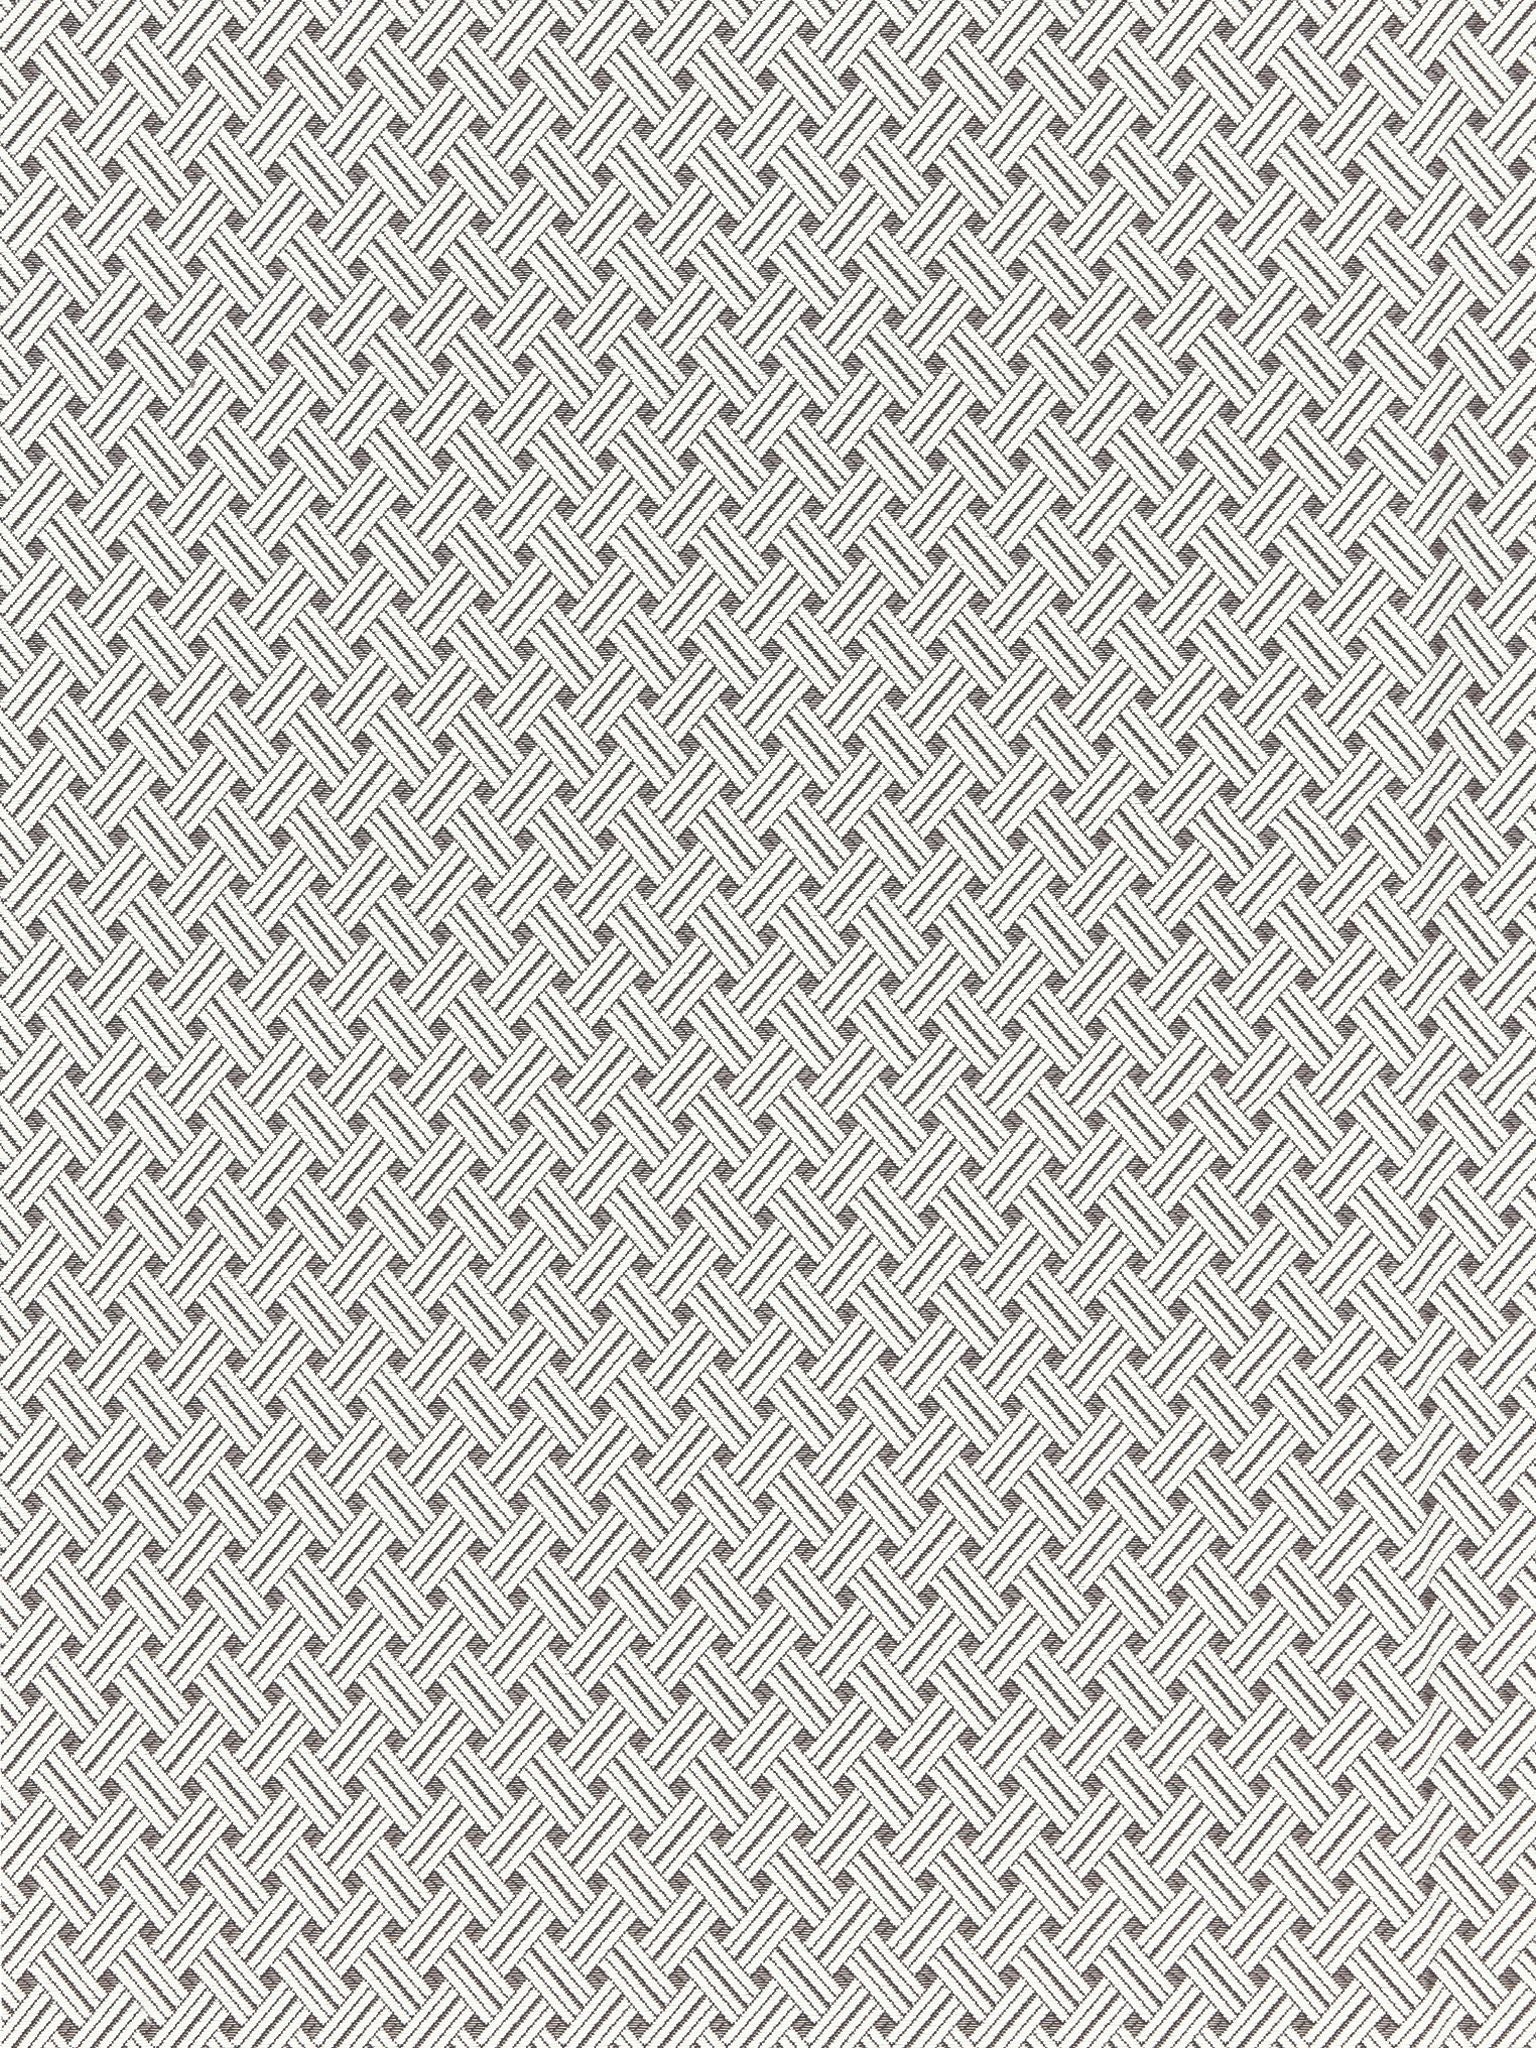 Roatan Weave fabric in pearl grey color - pattern number SC 000227187 - by Scalamandre in the Scalamandre Fabrics Book 1 collection